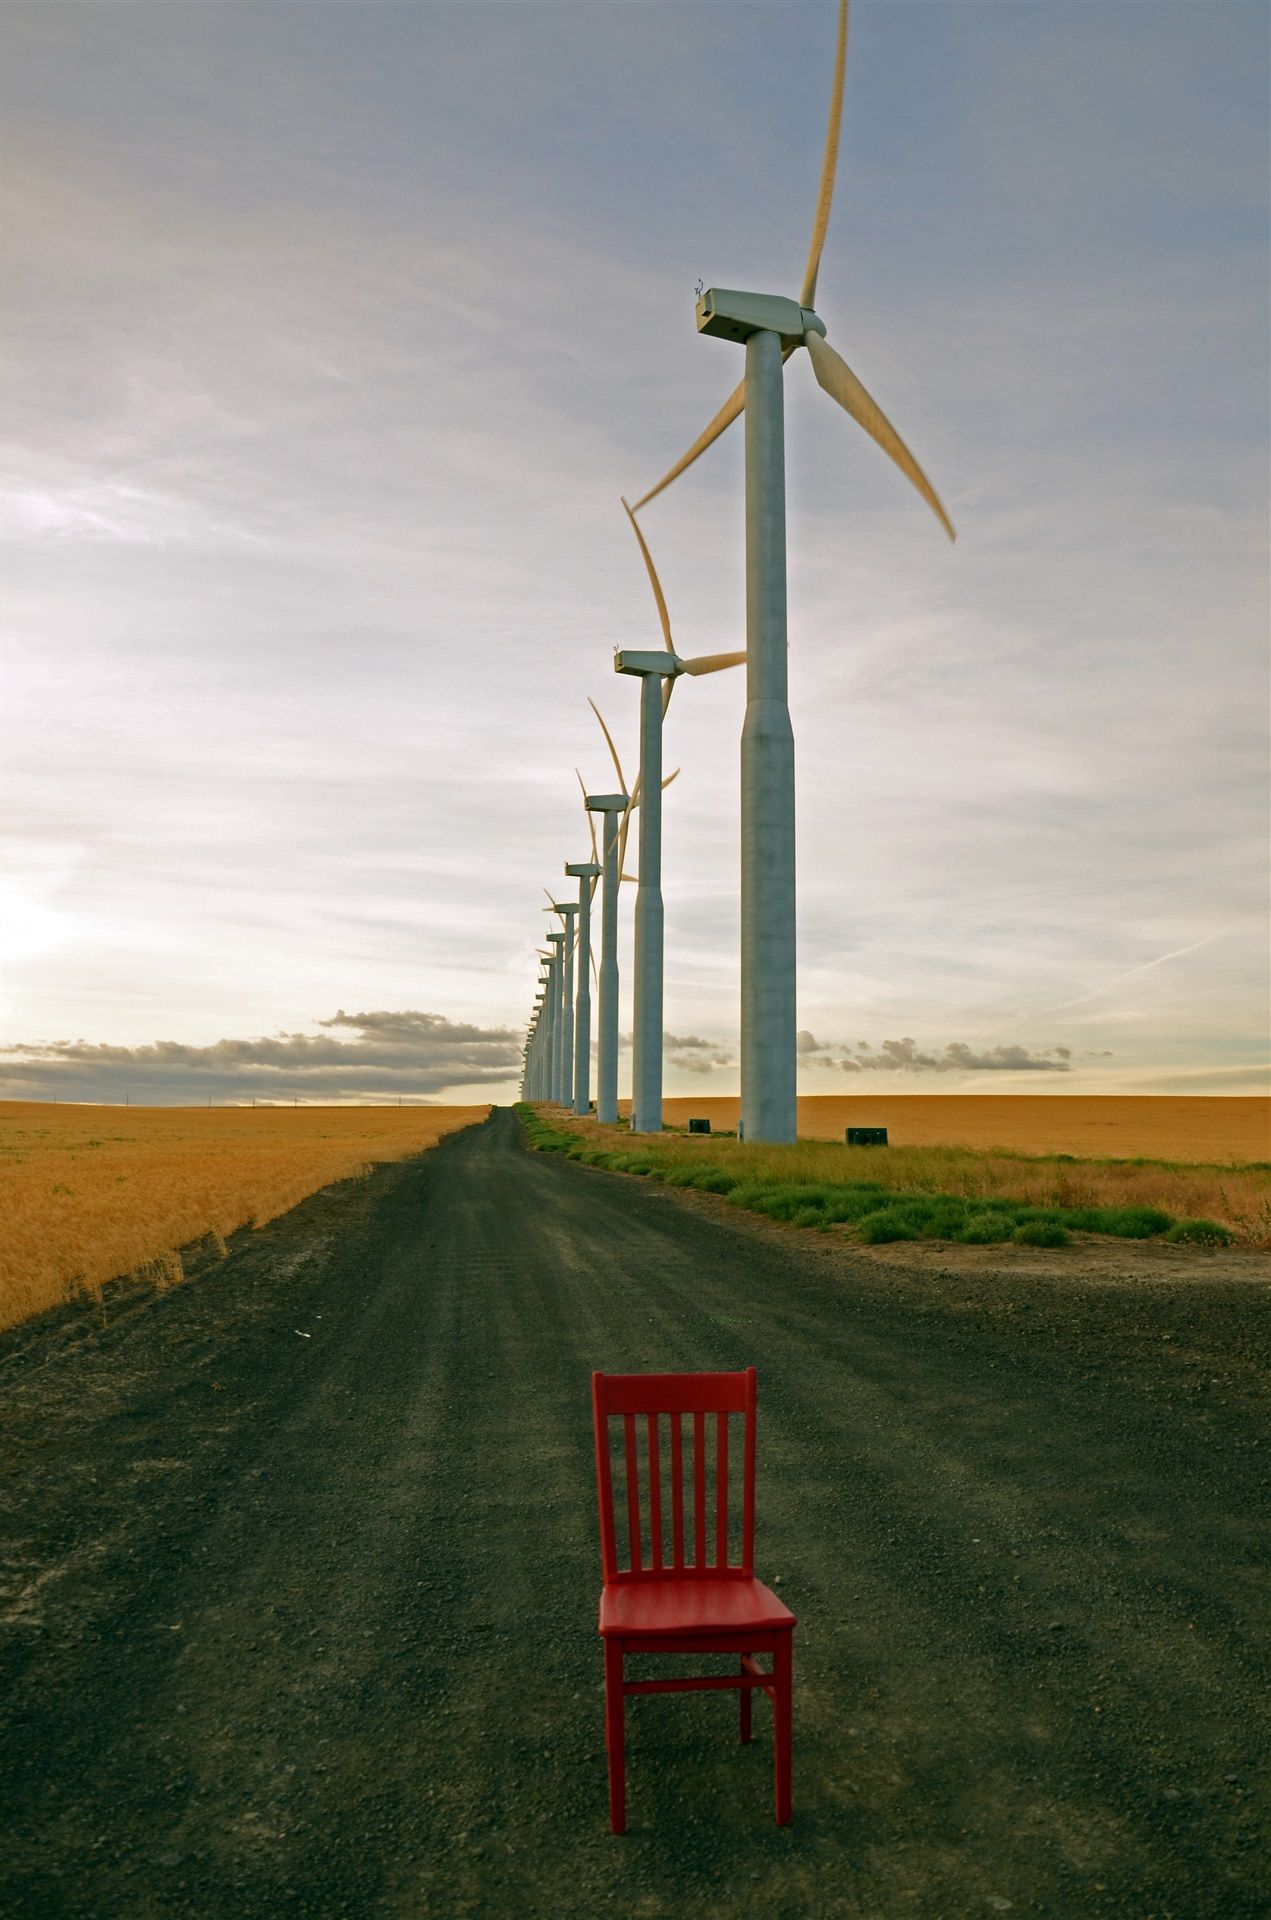 Red chair sitting on a gravel road that is lined with wind turbines